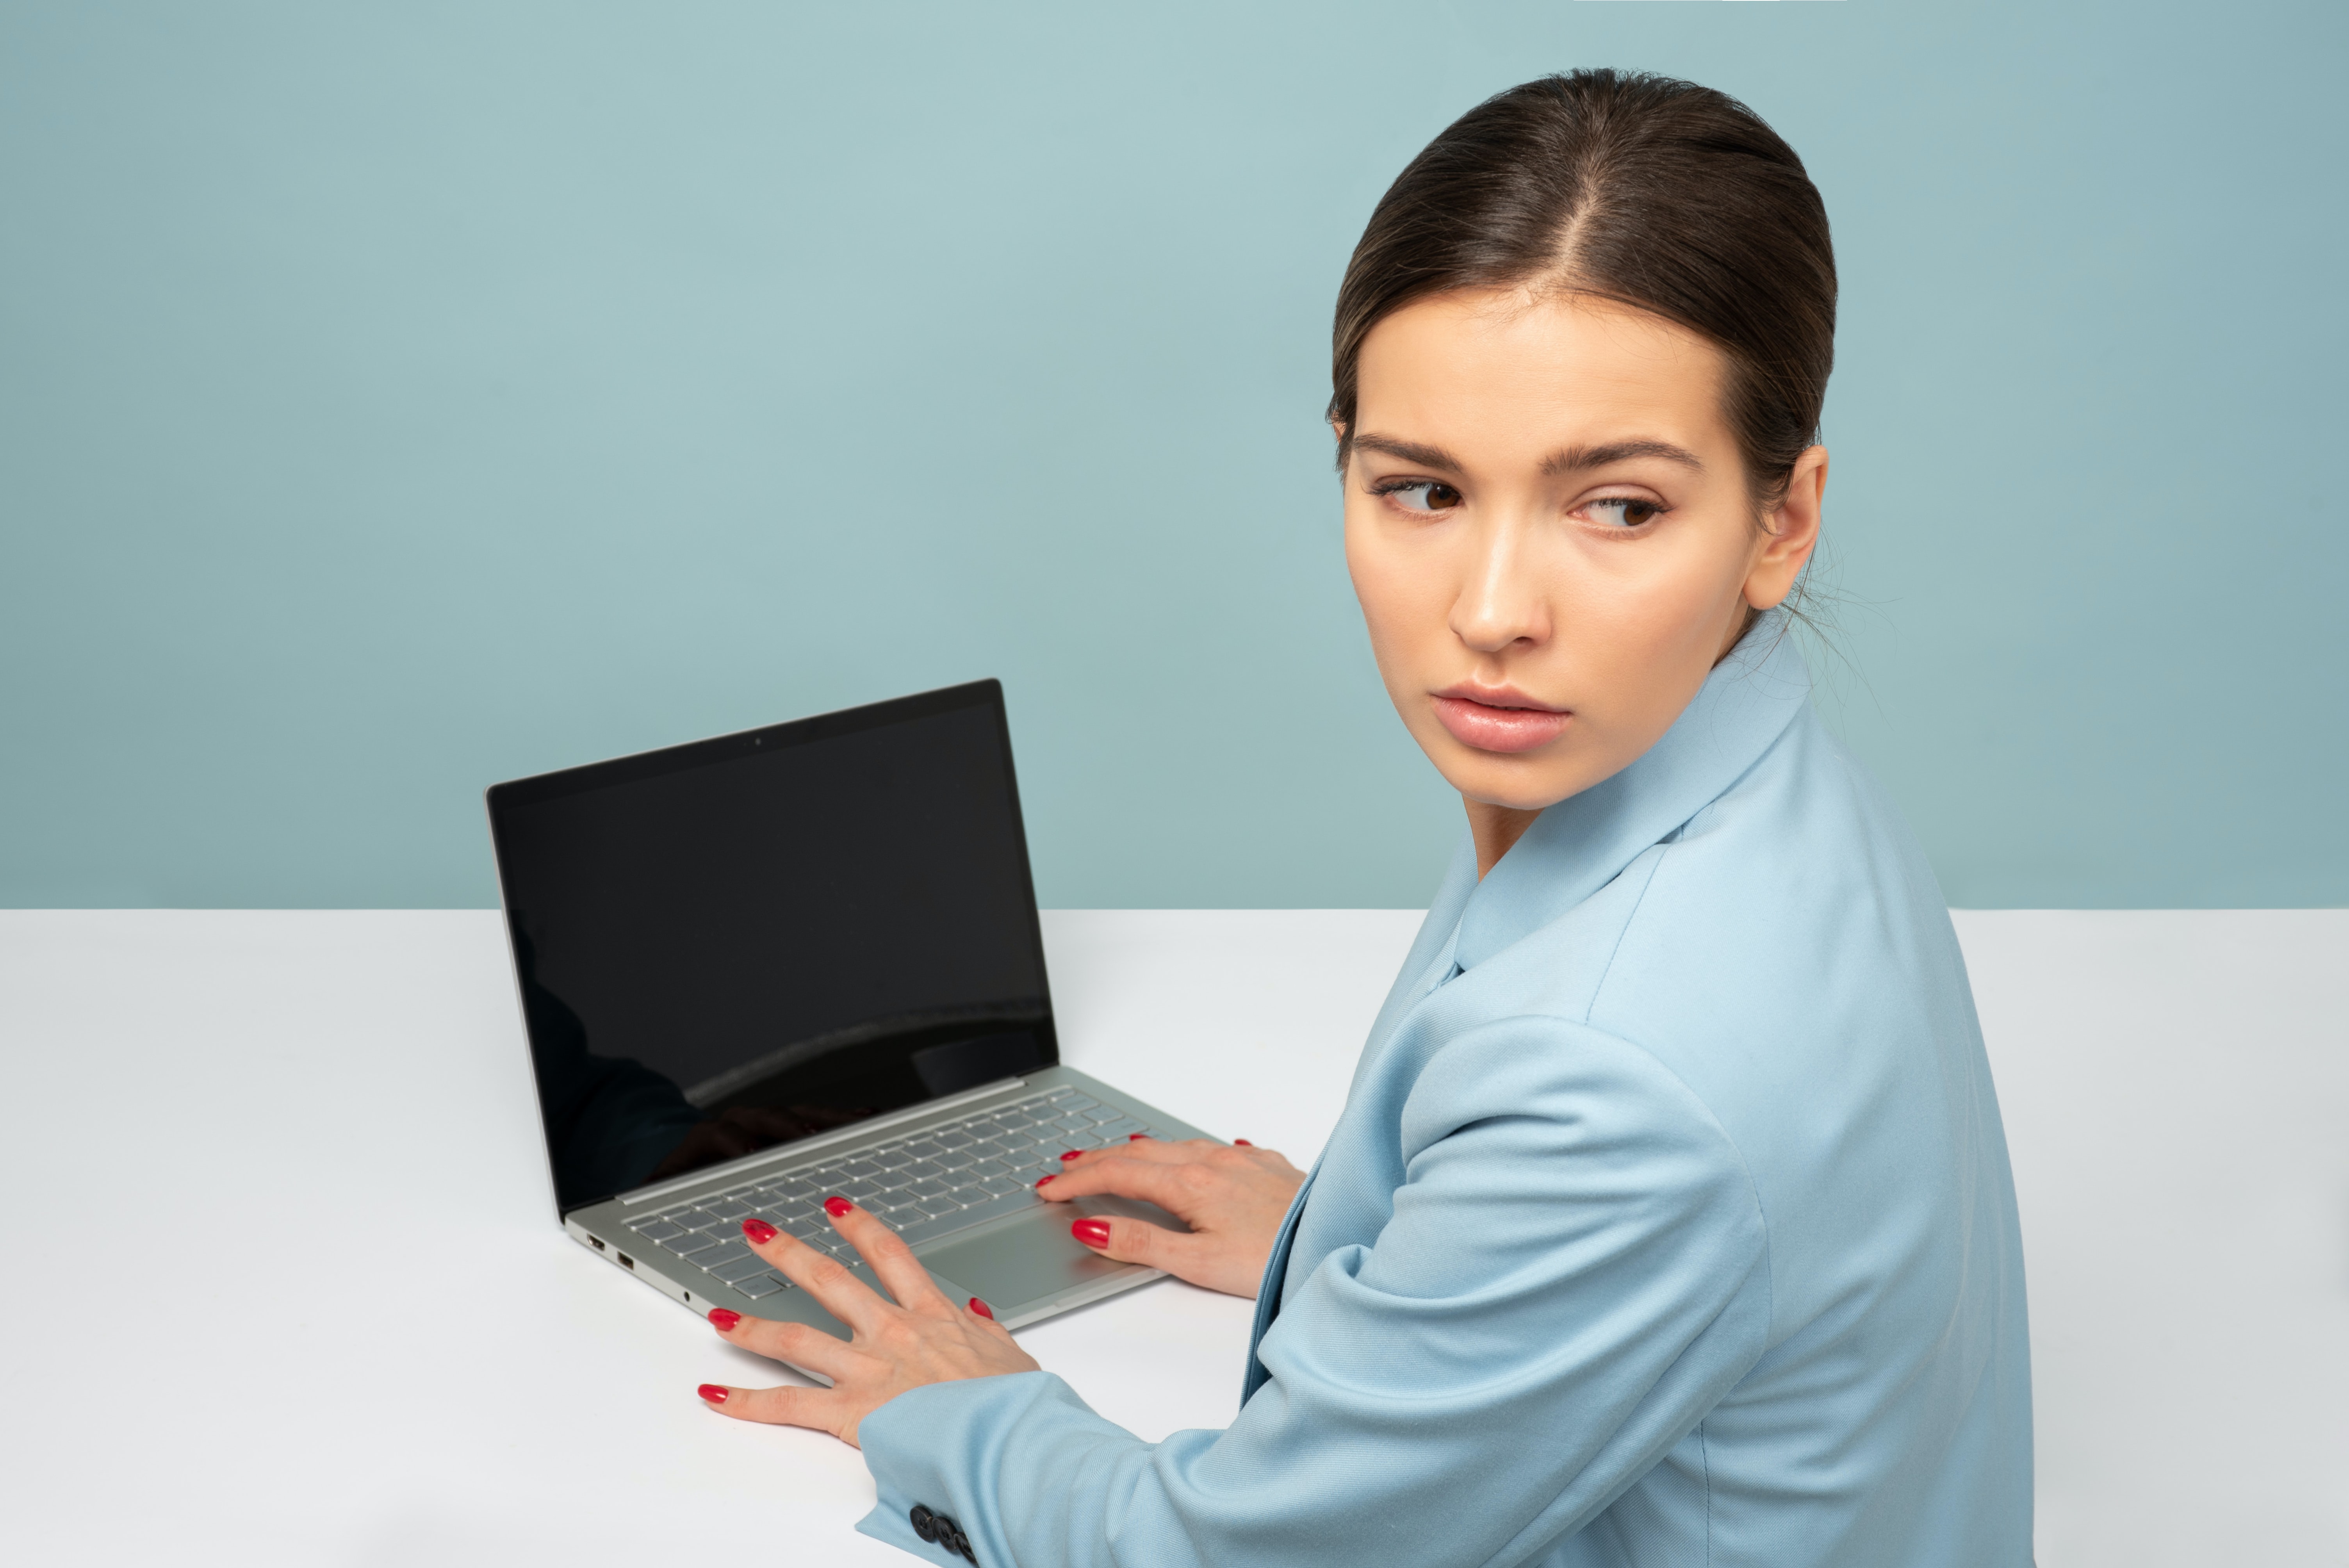 PRT Staffing Don't Fret the Employment Gap (Too Much) Worried Girl at Computer